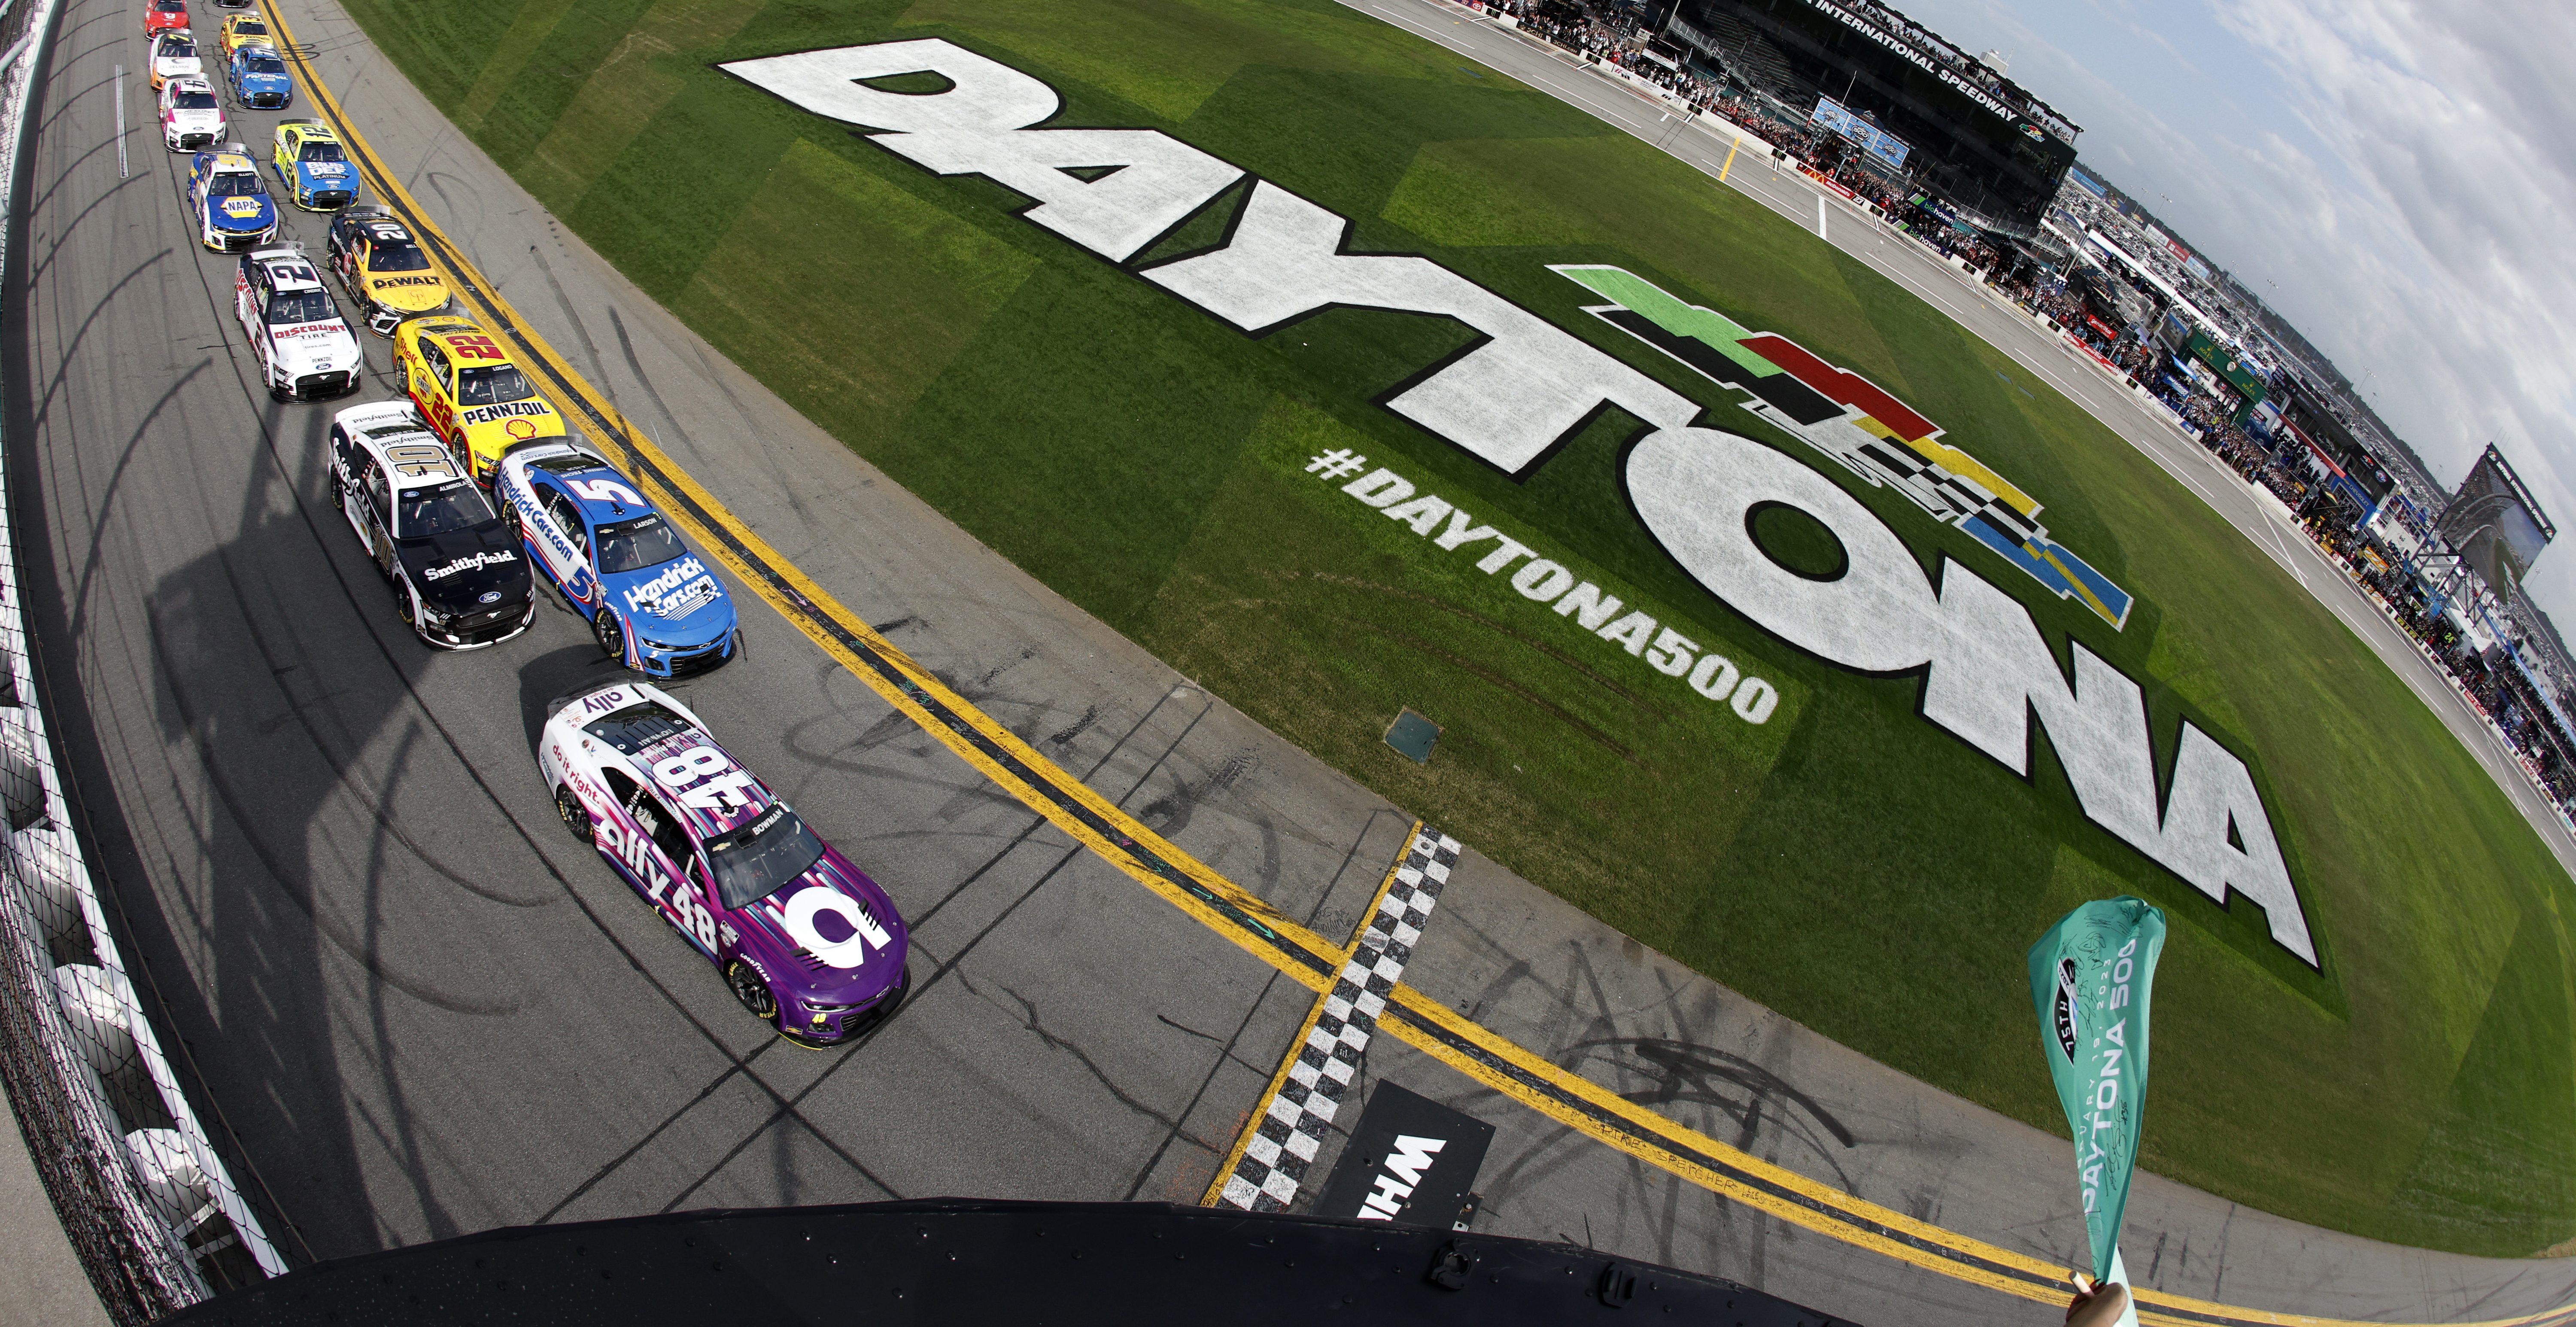 DAYTONA BEACH, FLORIDA - FEBRUARY 19: Alex Bowman, driver of the #48 Ally Chevrolet, leads the field to the green flag to start the NASCAR Cup Series 65th Annual Daytona 500 at Daytona International Speedway on February 19, 2023 in Daytona Beach, Florida.